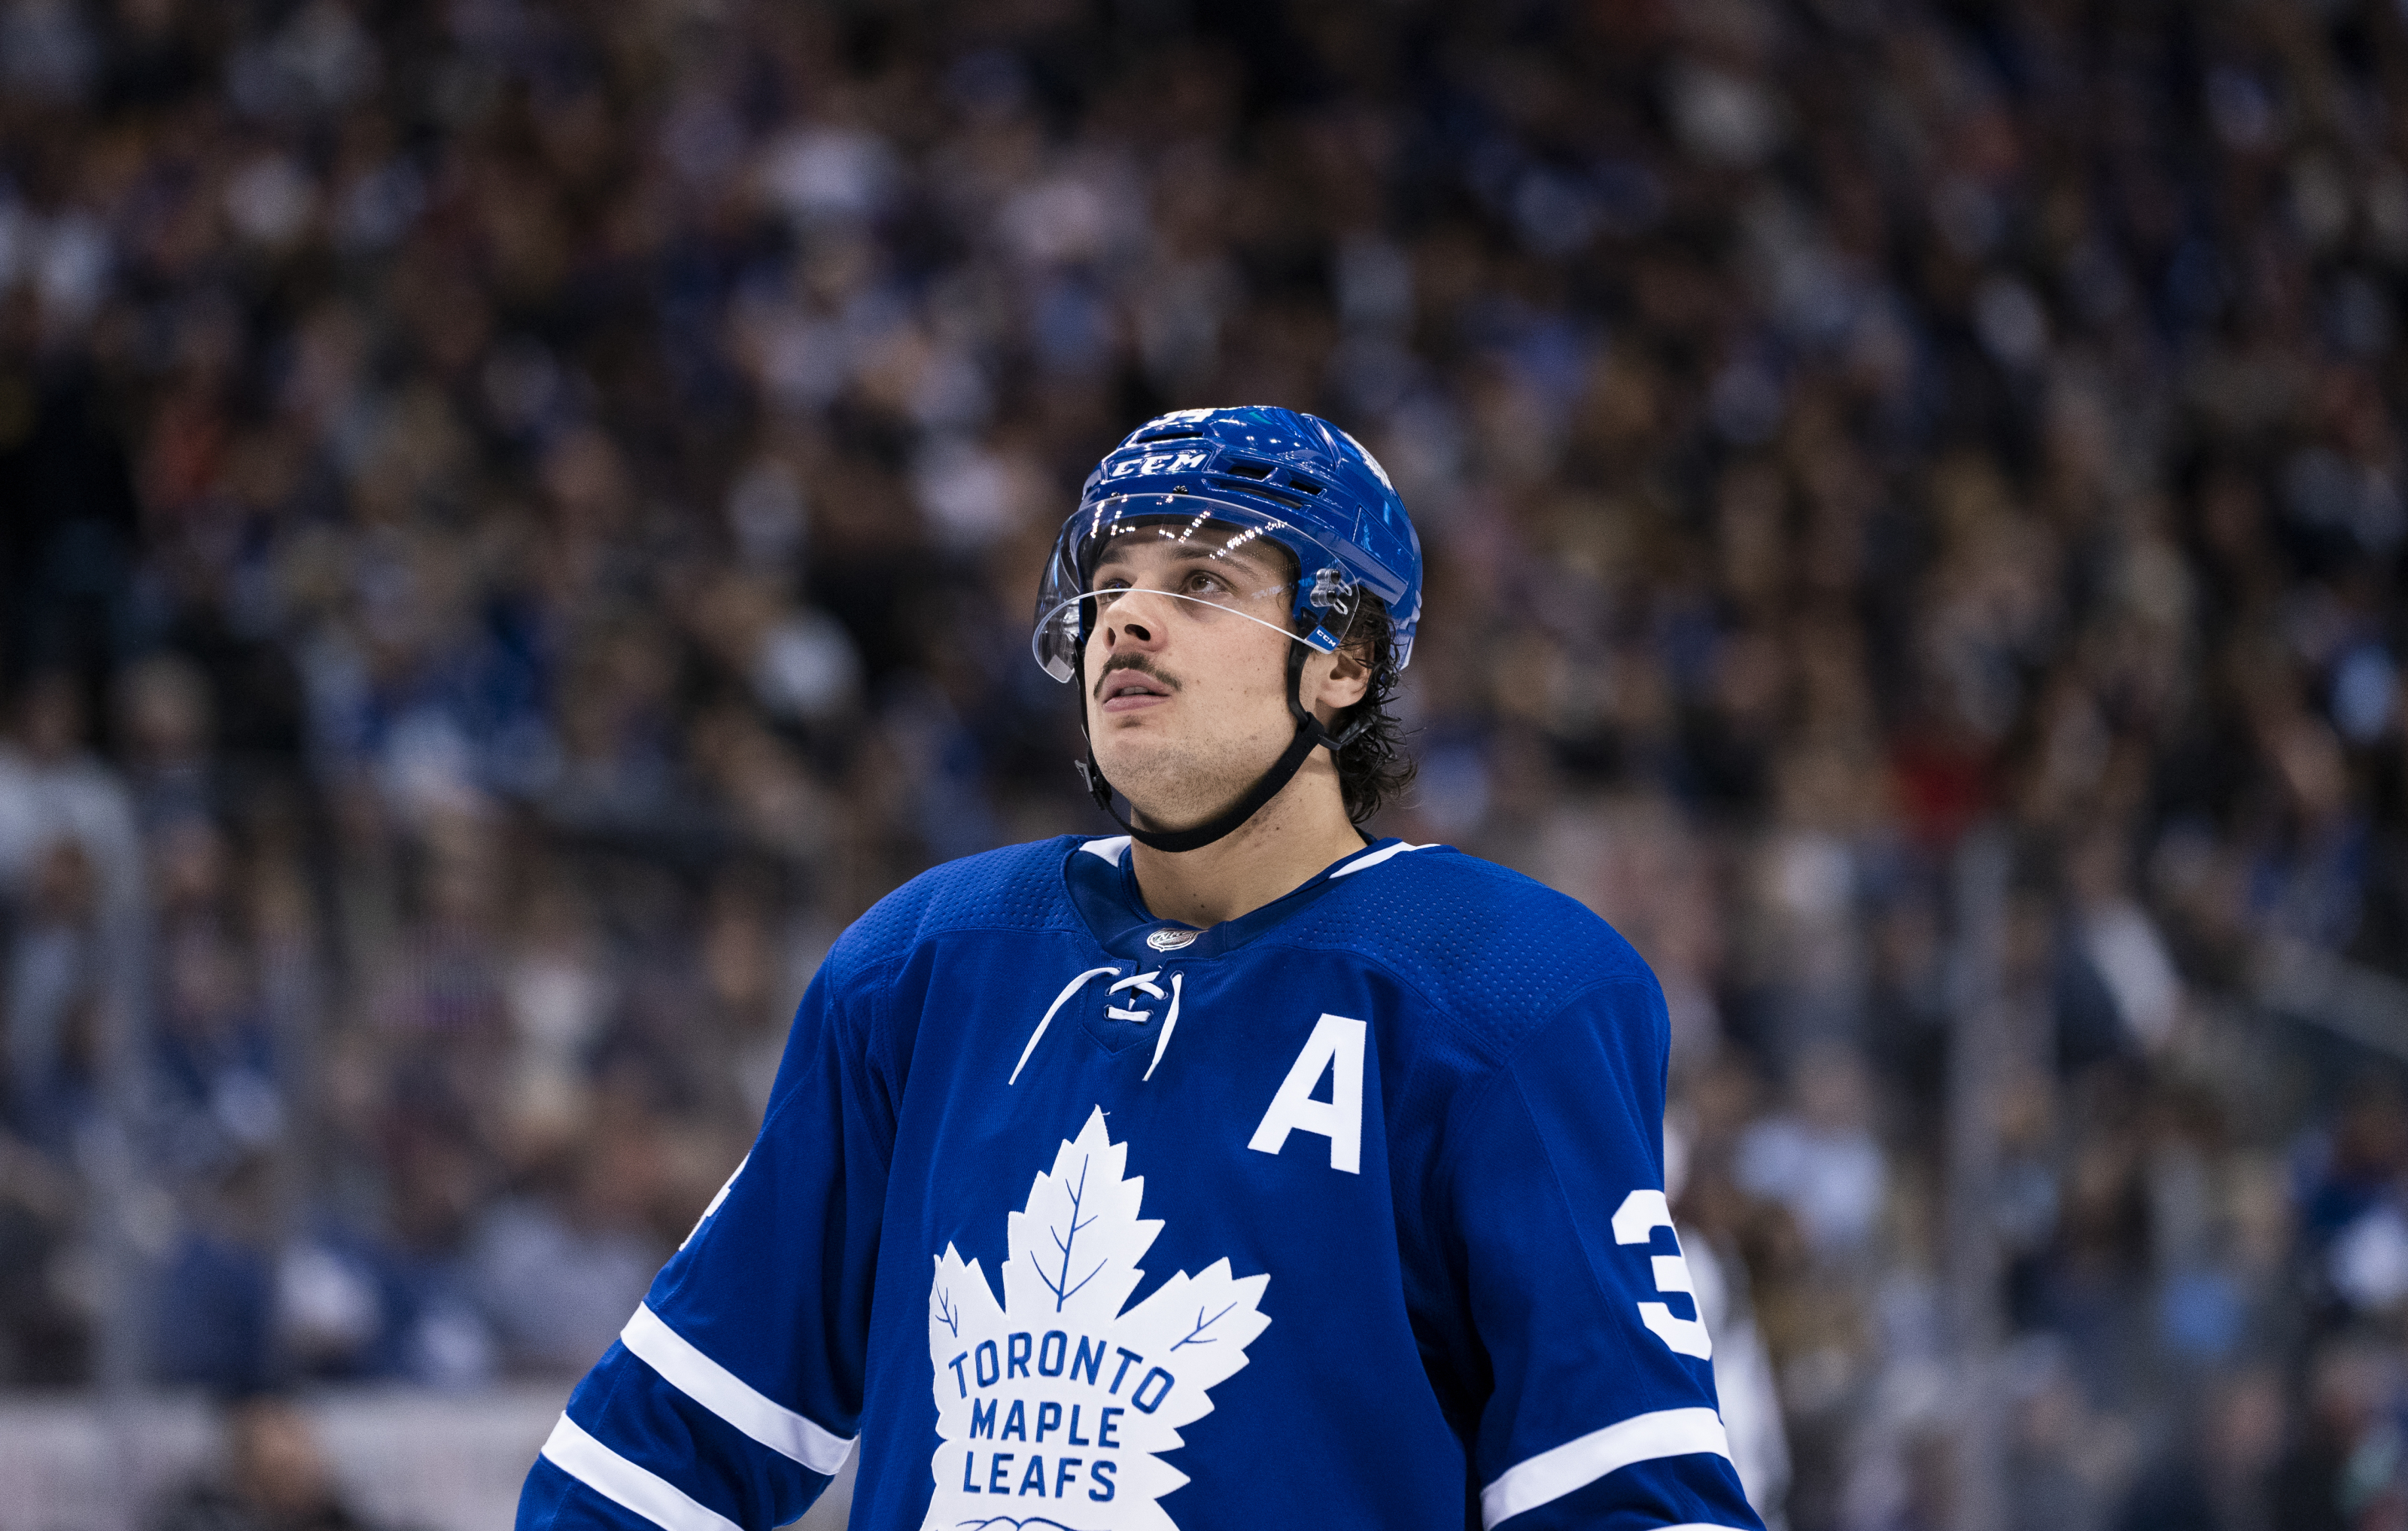 Auston Matthews has yet another hat trick for Maple Leafs